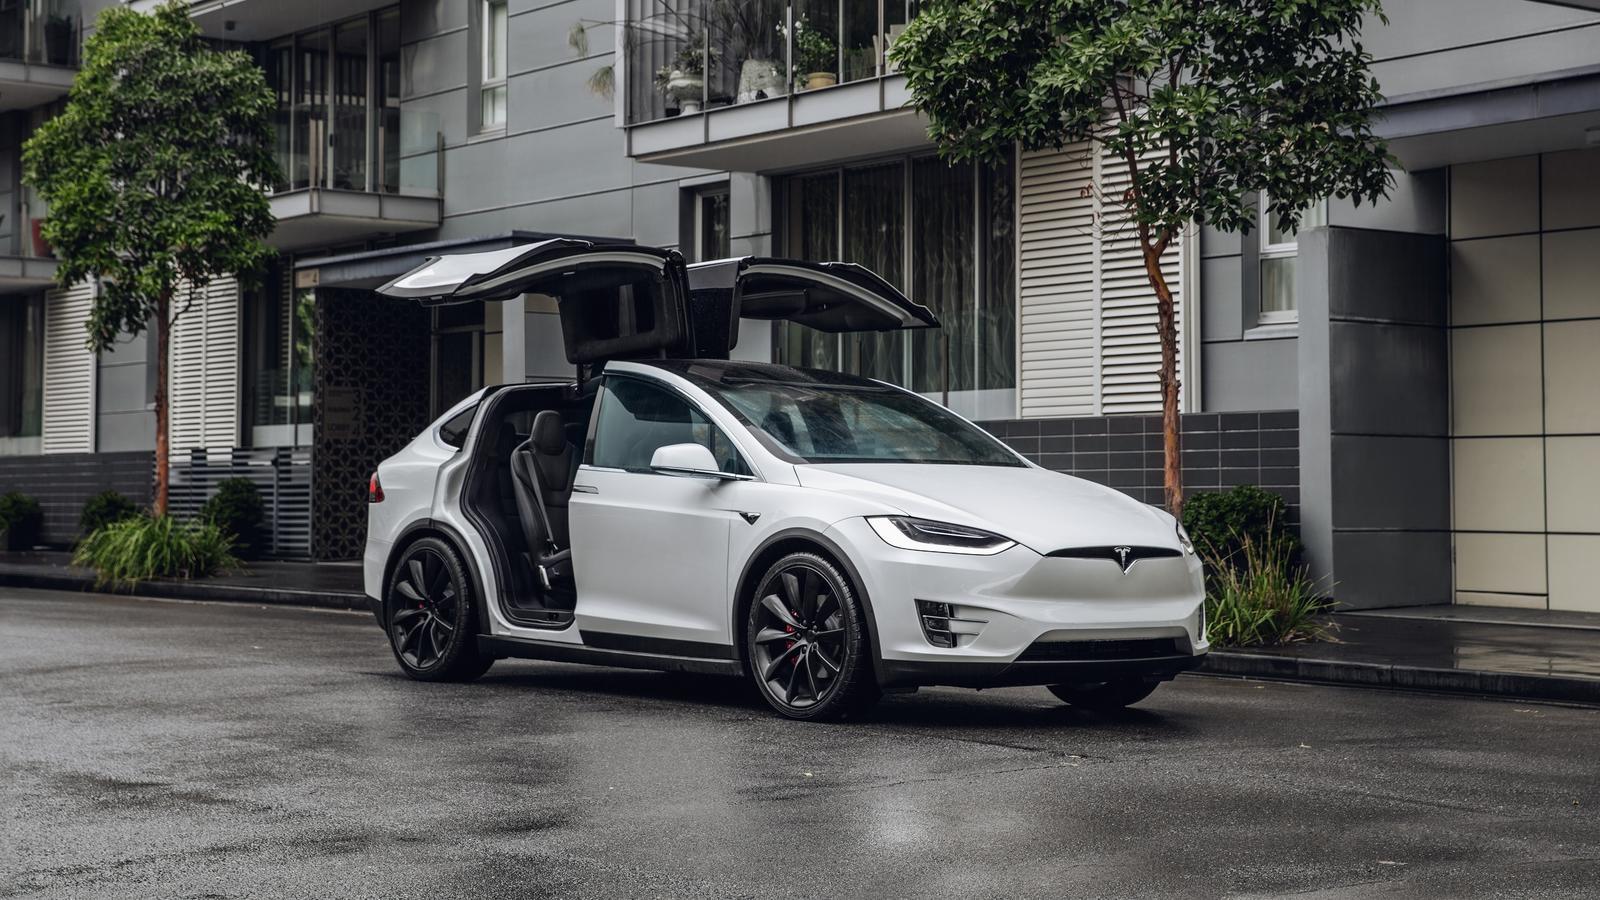 Tesla Model X: Latest News, Reviews, Specifications, Prices, Photo And Videos